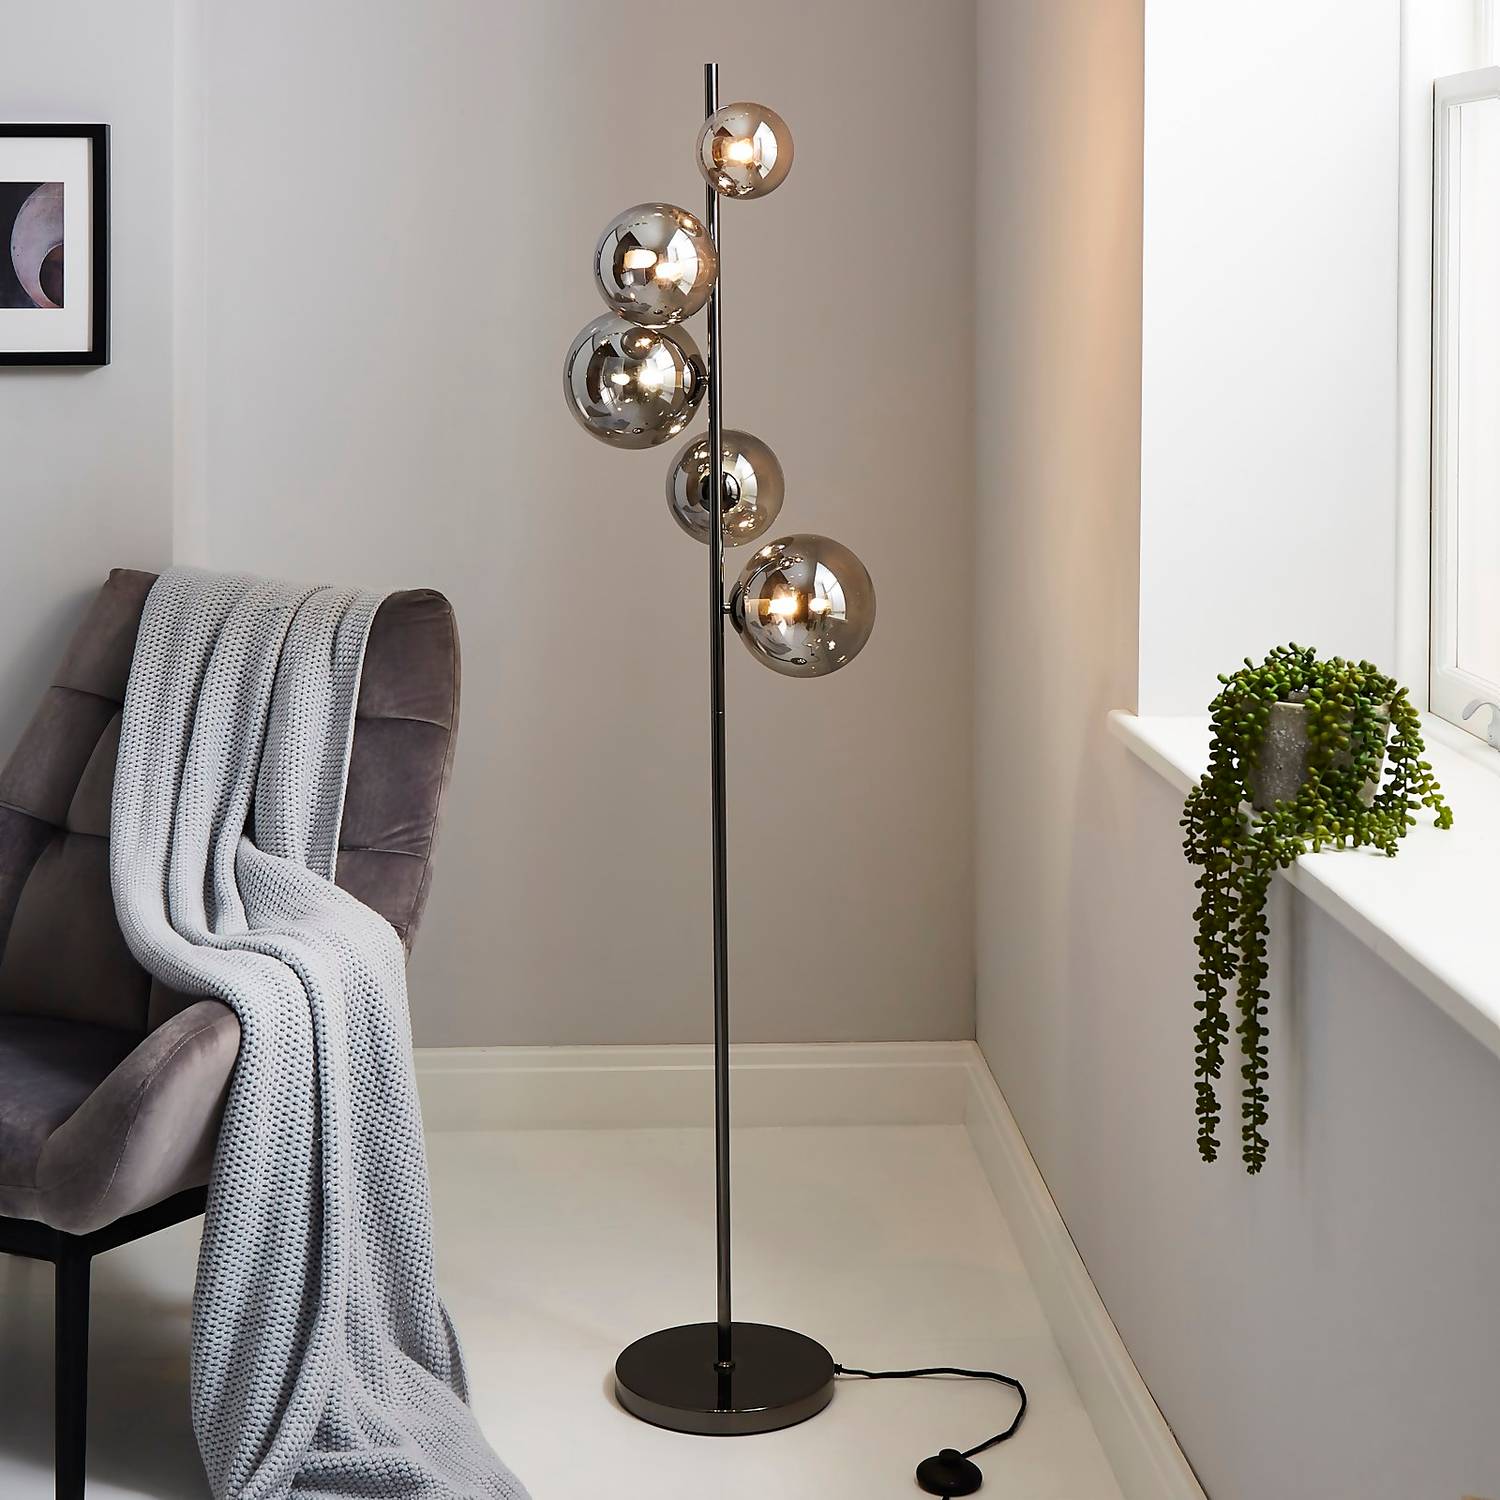 How to Style Floor Lamps